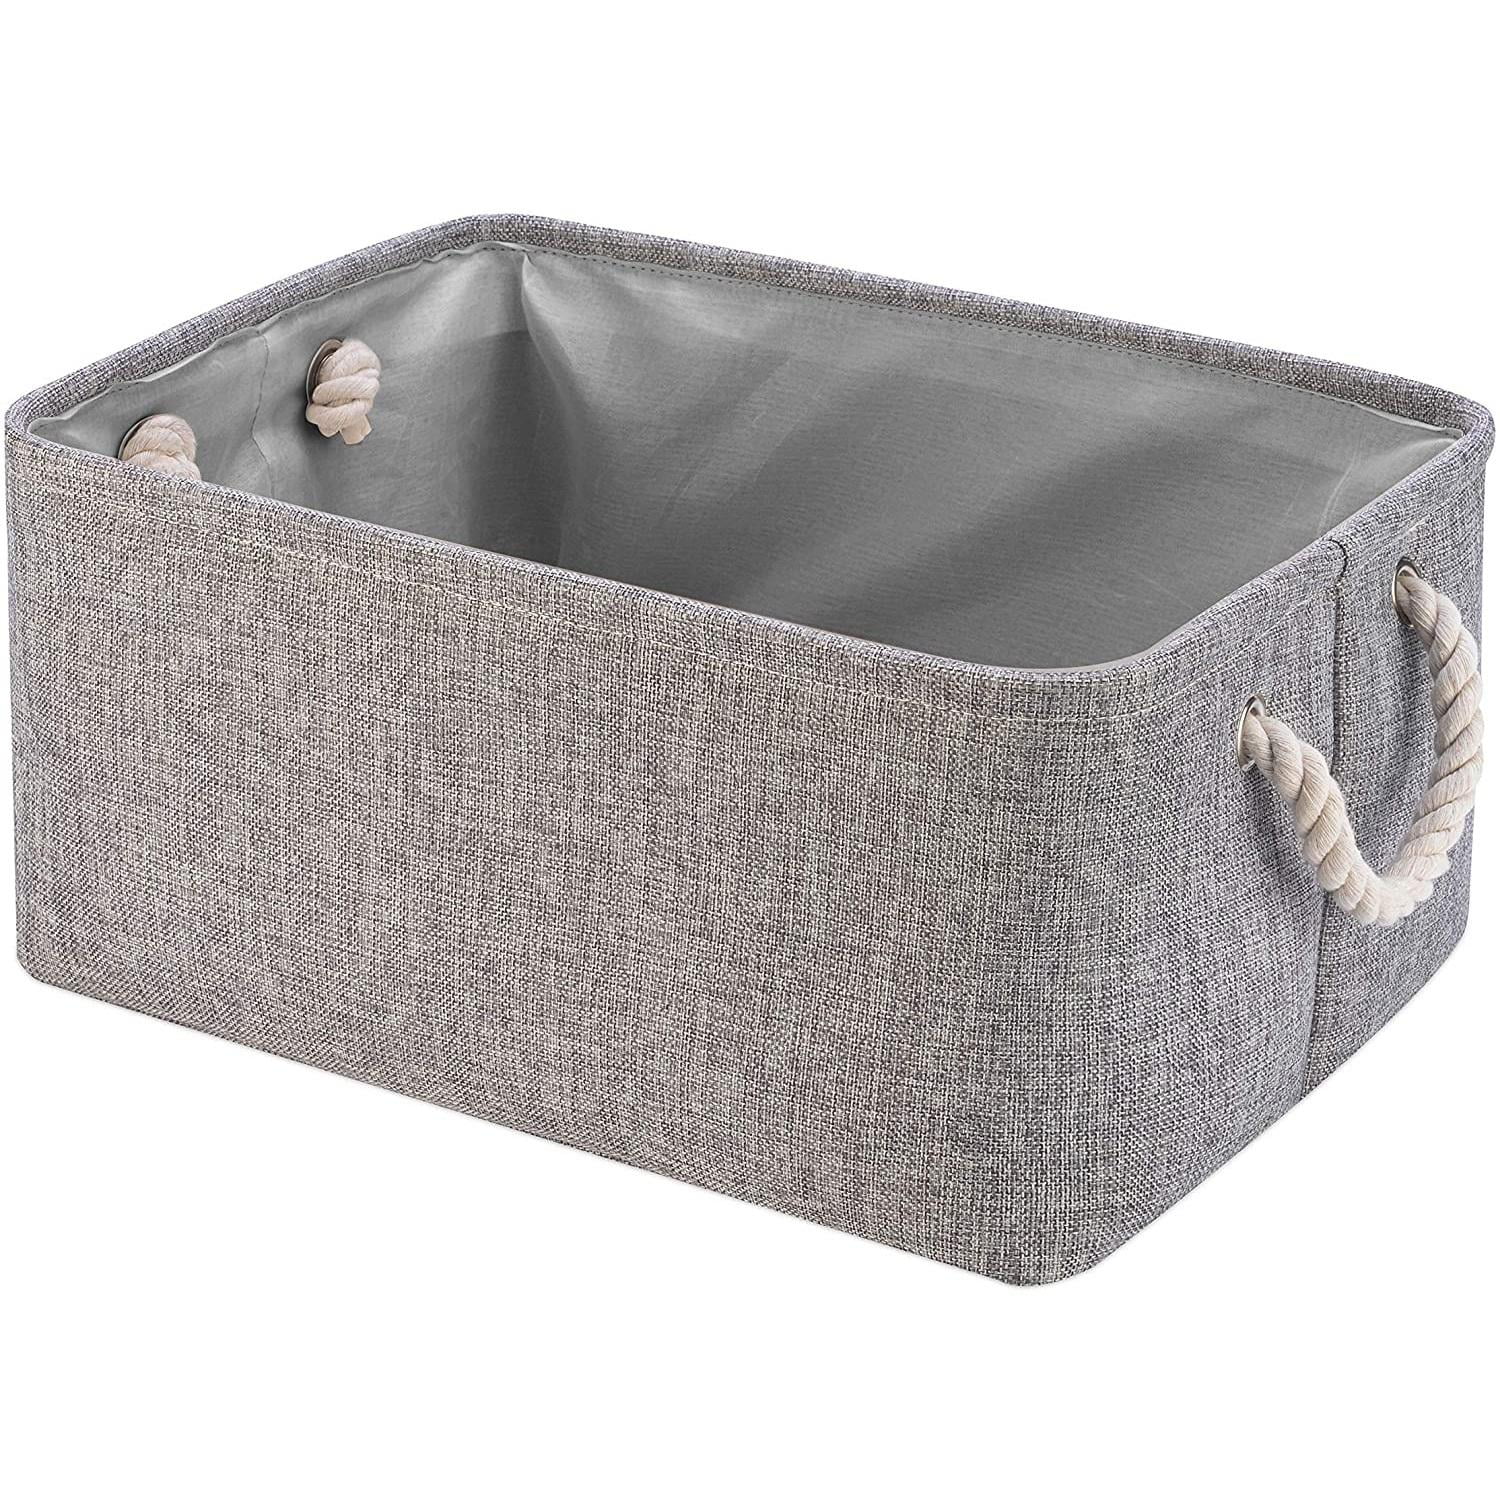  LoforHoney Home Fabric Storage Baskets for Shelves, Foldable  Canvas Closet Organizer Bins with Cotton Rope Handles for Organizing  Clothes, Large, Light Gray, 2-Pack : Home & Kitchen